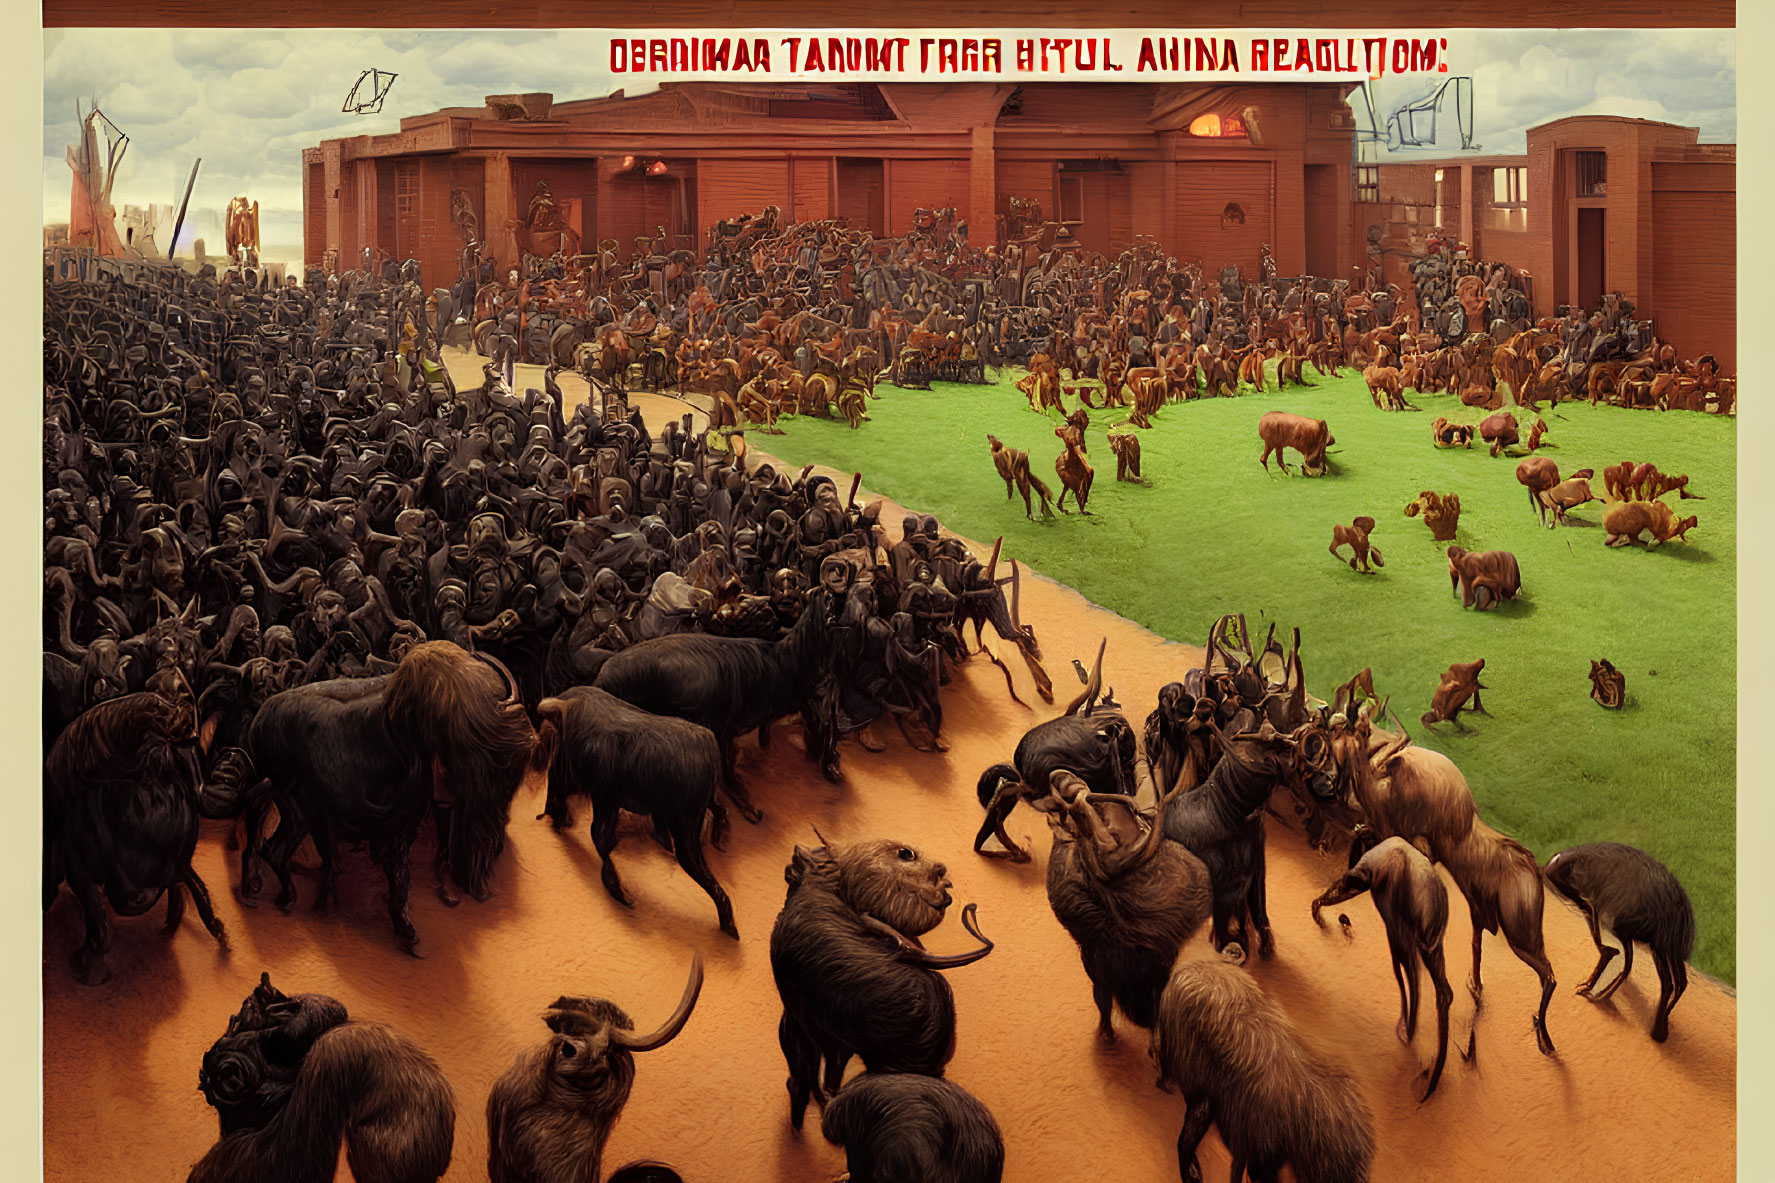 Artwork of diverse mammal species gathered in enclosure with red buildings.